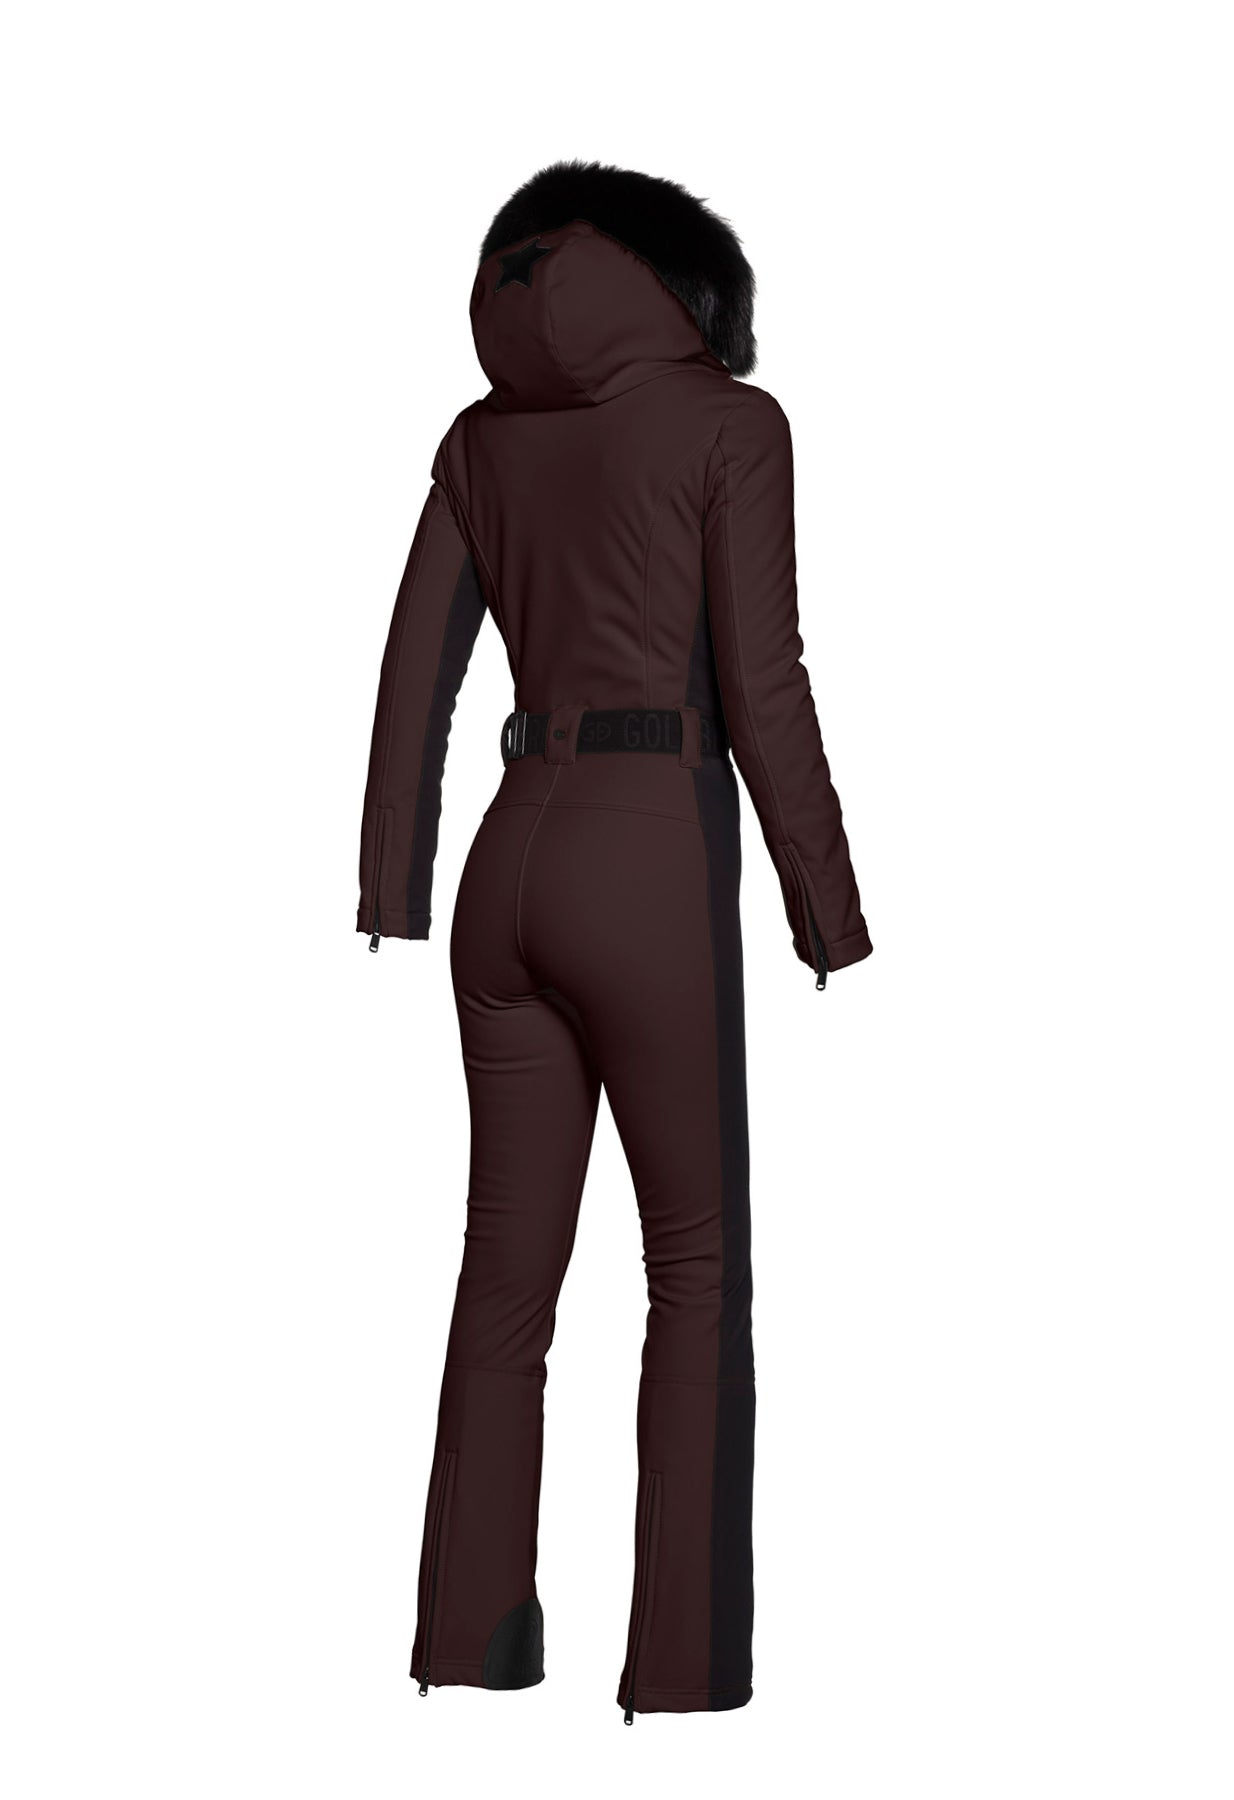 Goldbergh Parry One Piece Ski Suit in Brown with Faux Fur Hood